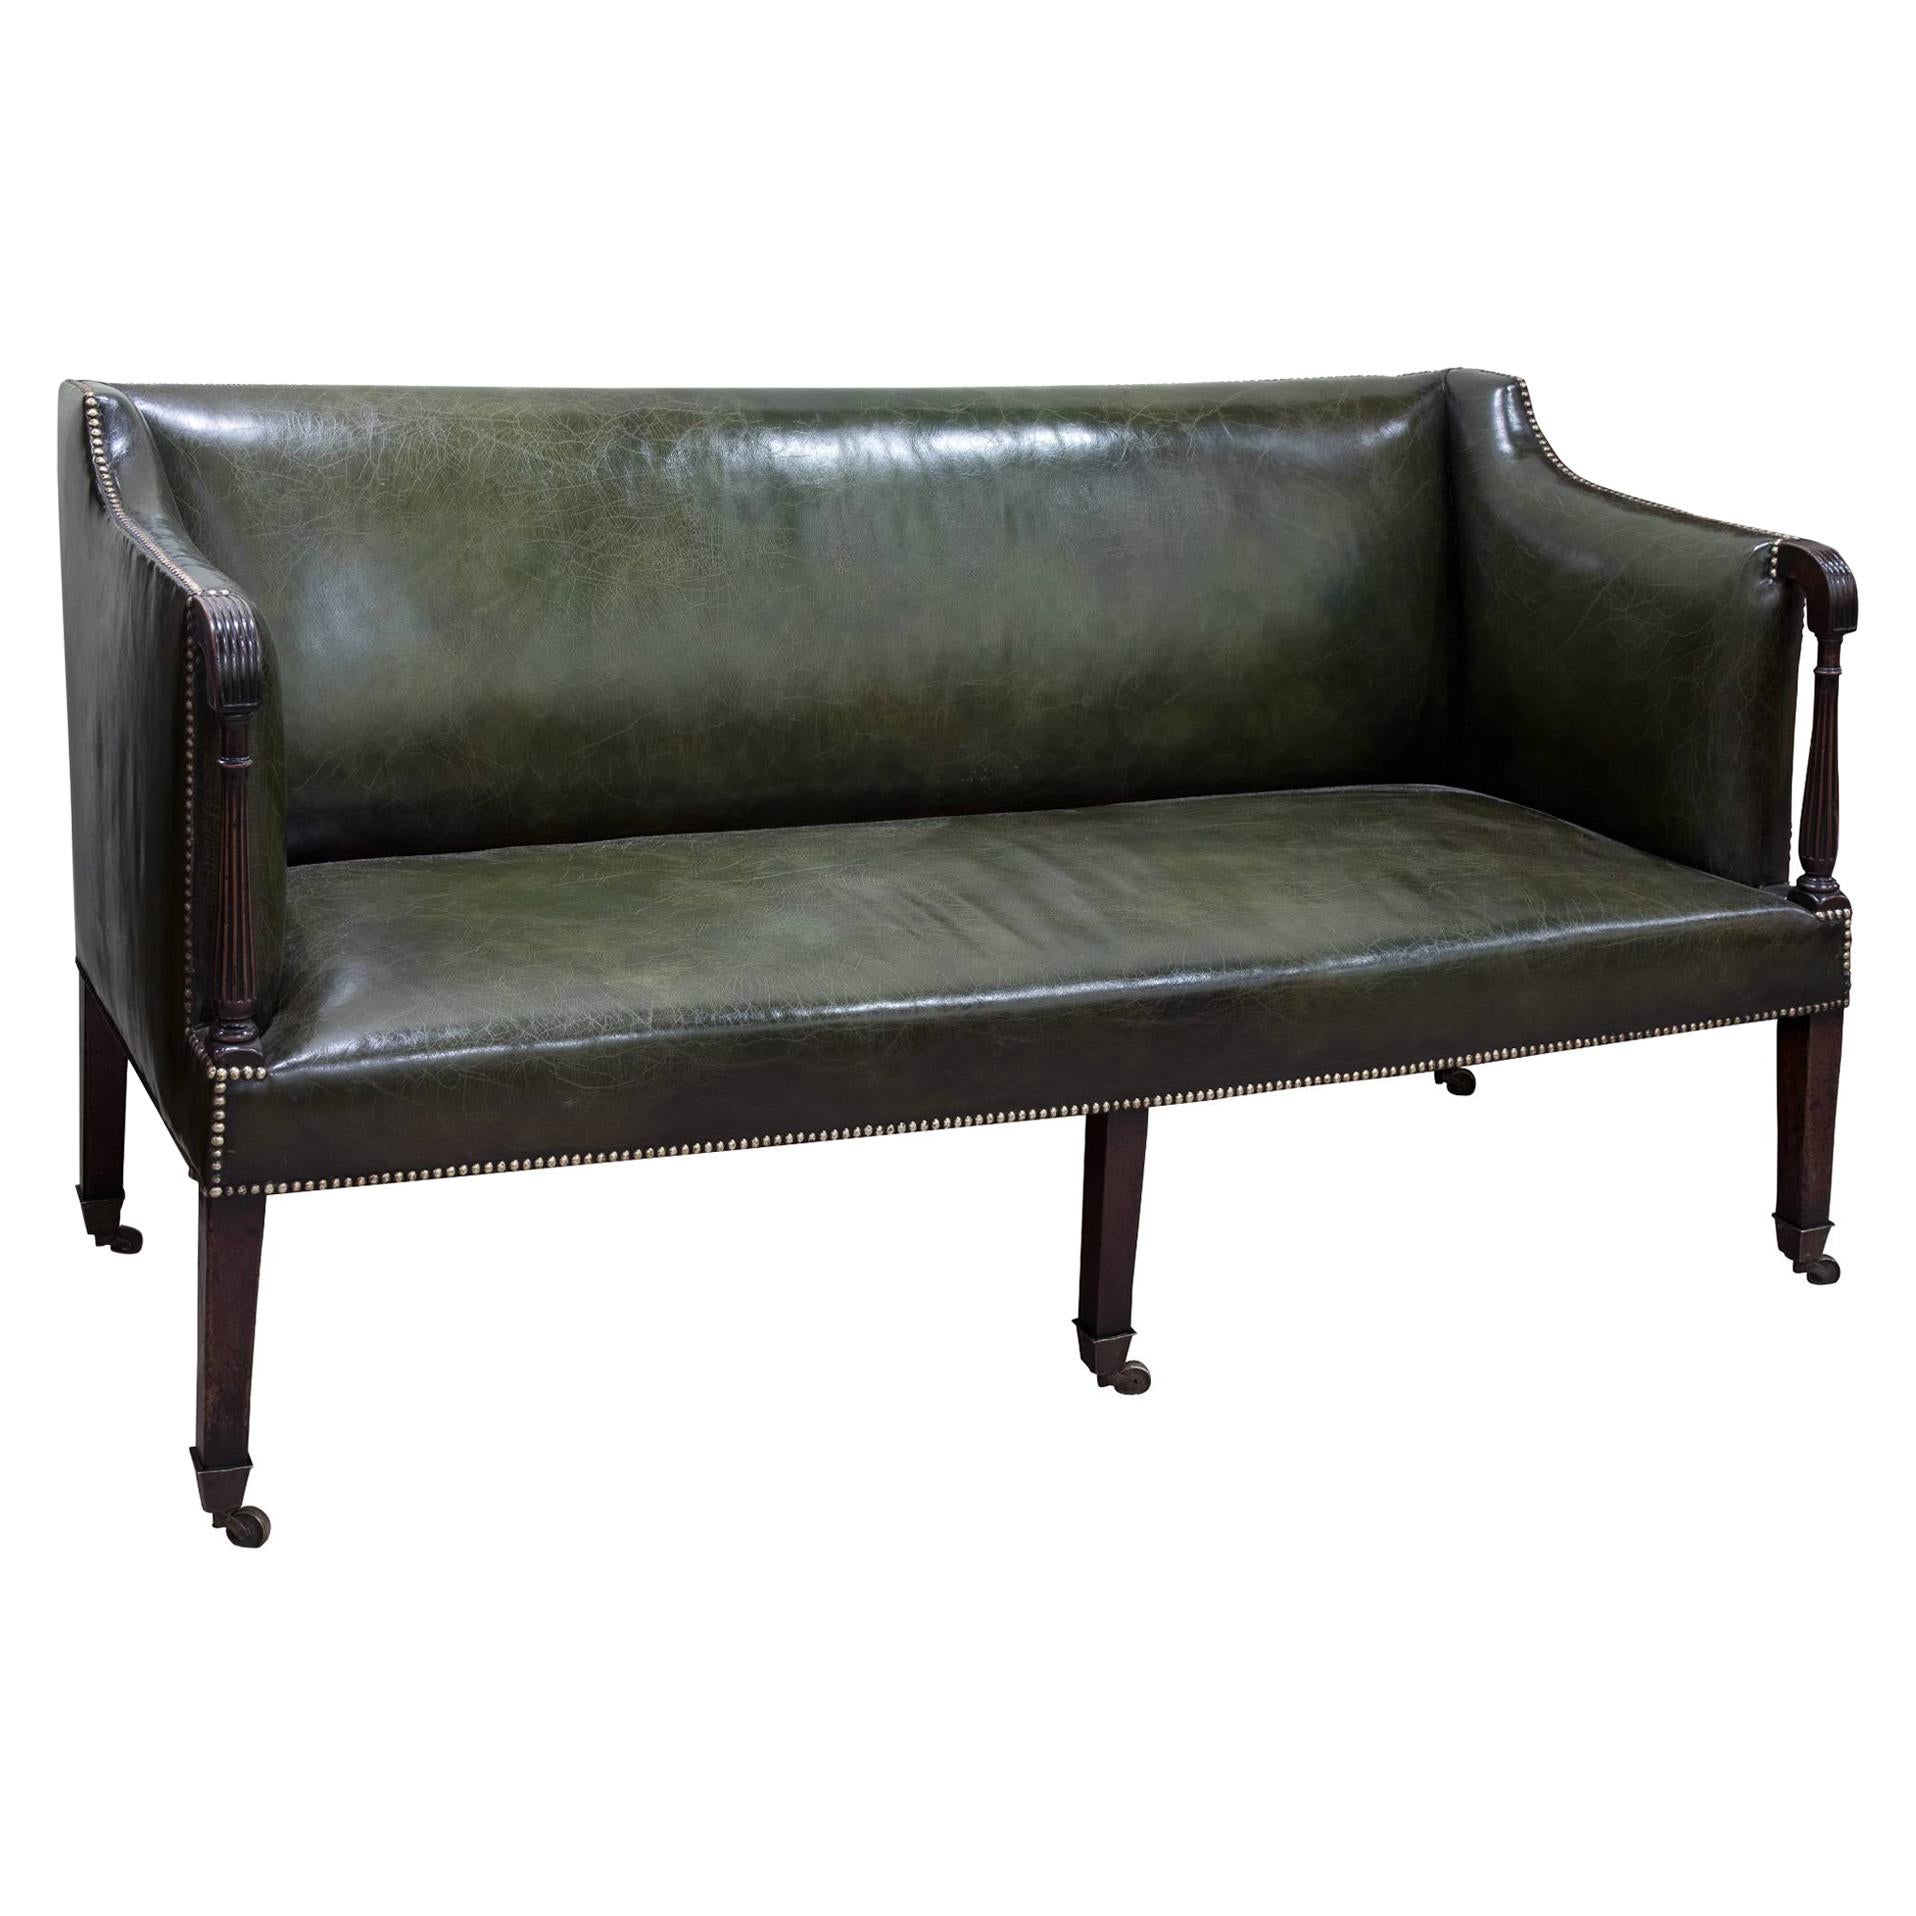 George III Dark Green Leather Sofa with Brass Castors, circa 1800 For Sale